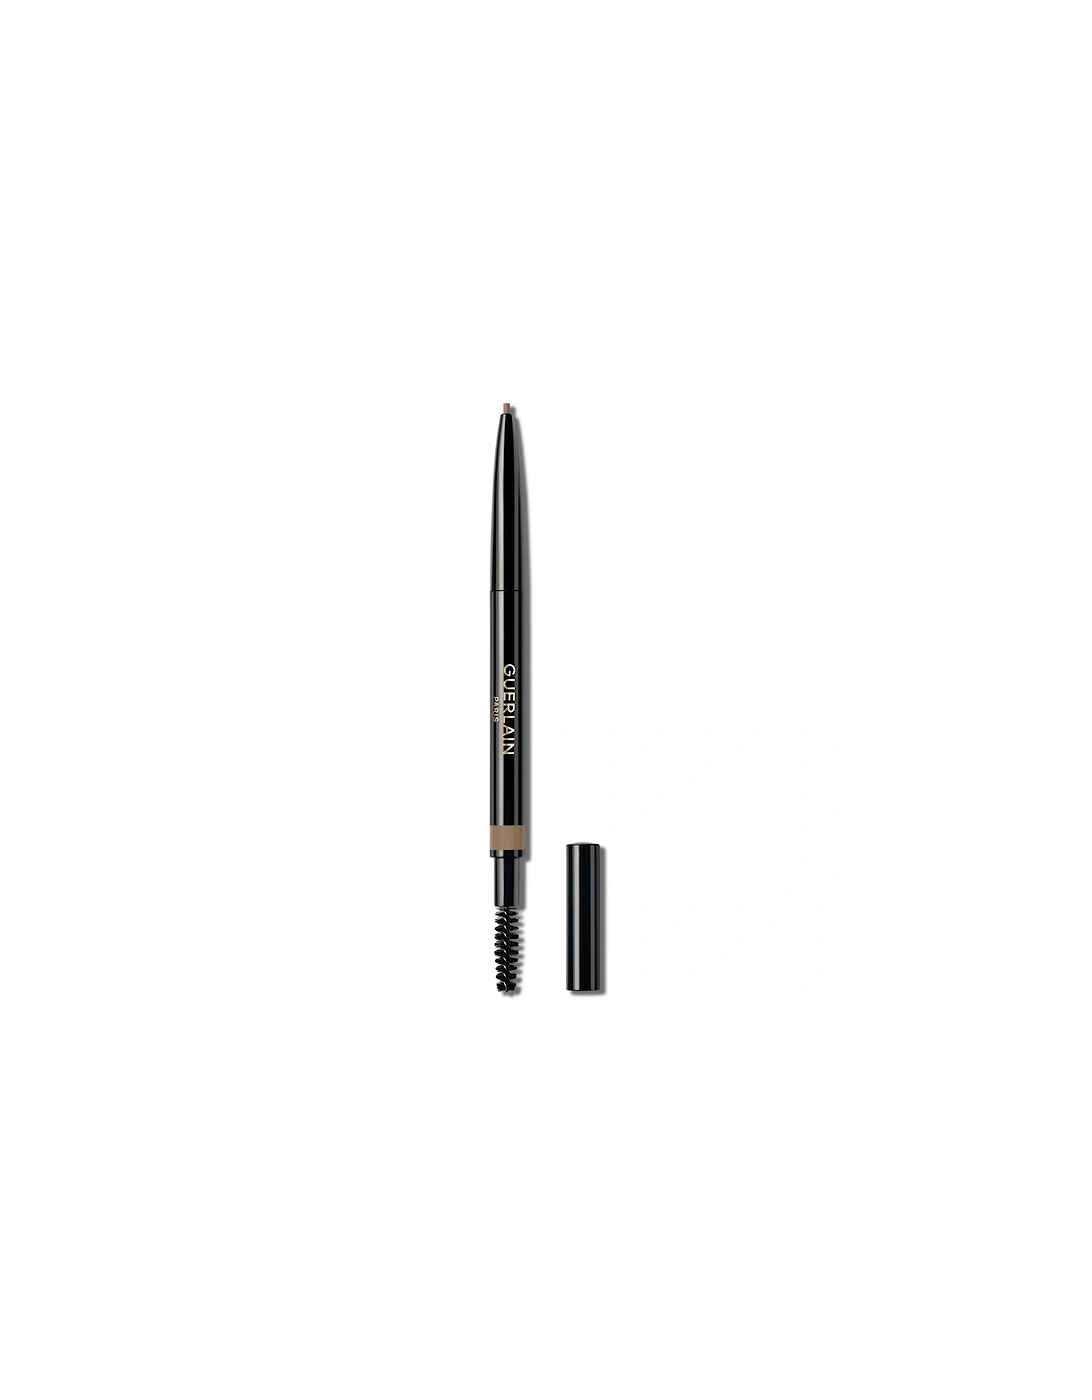 Brow G High Precision and Long Wear Brow Pencil - 01 Blonde, 2 of 1